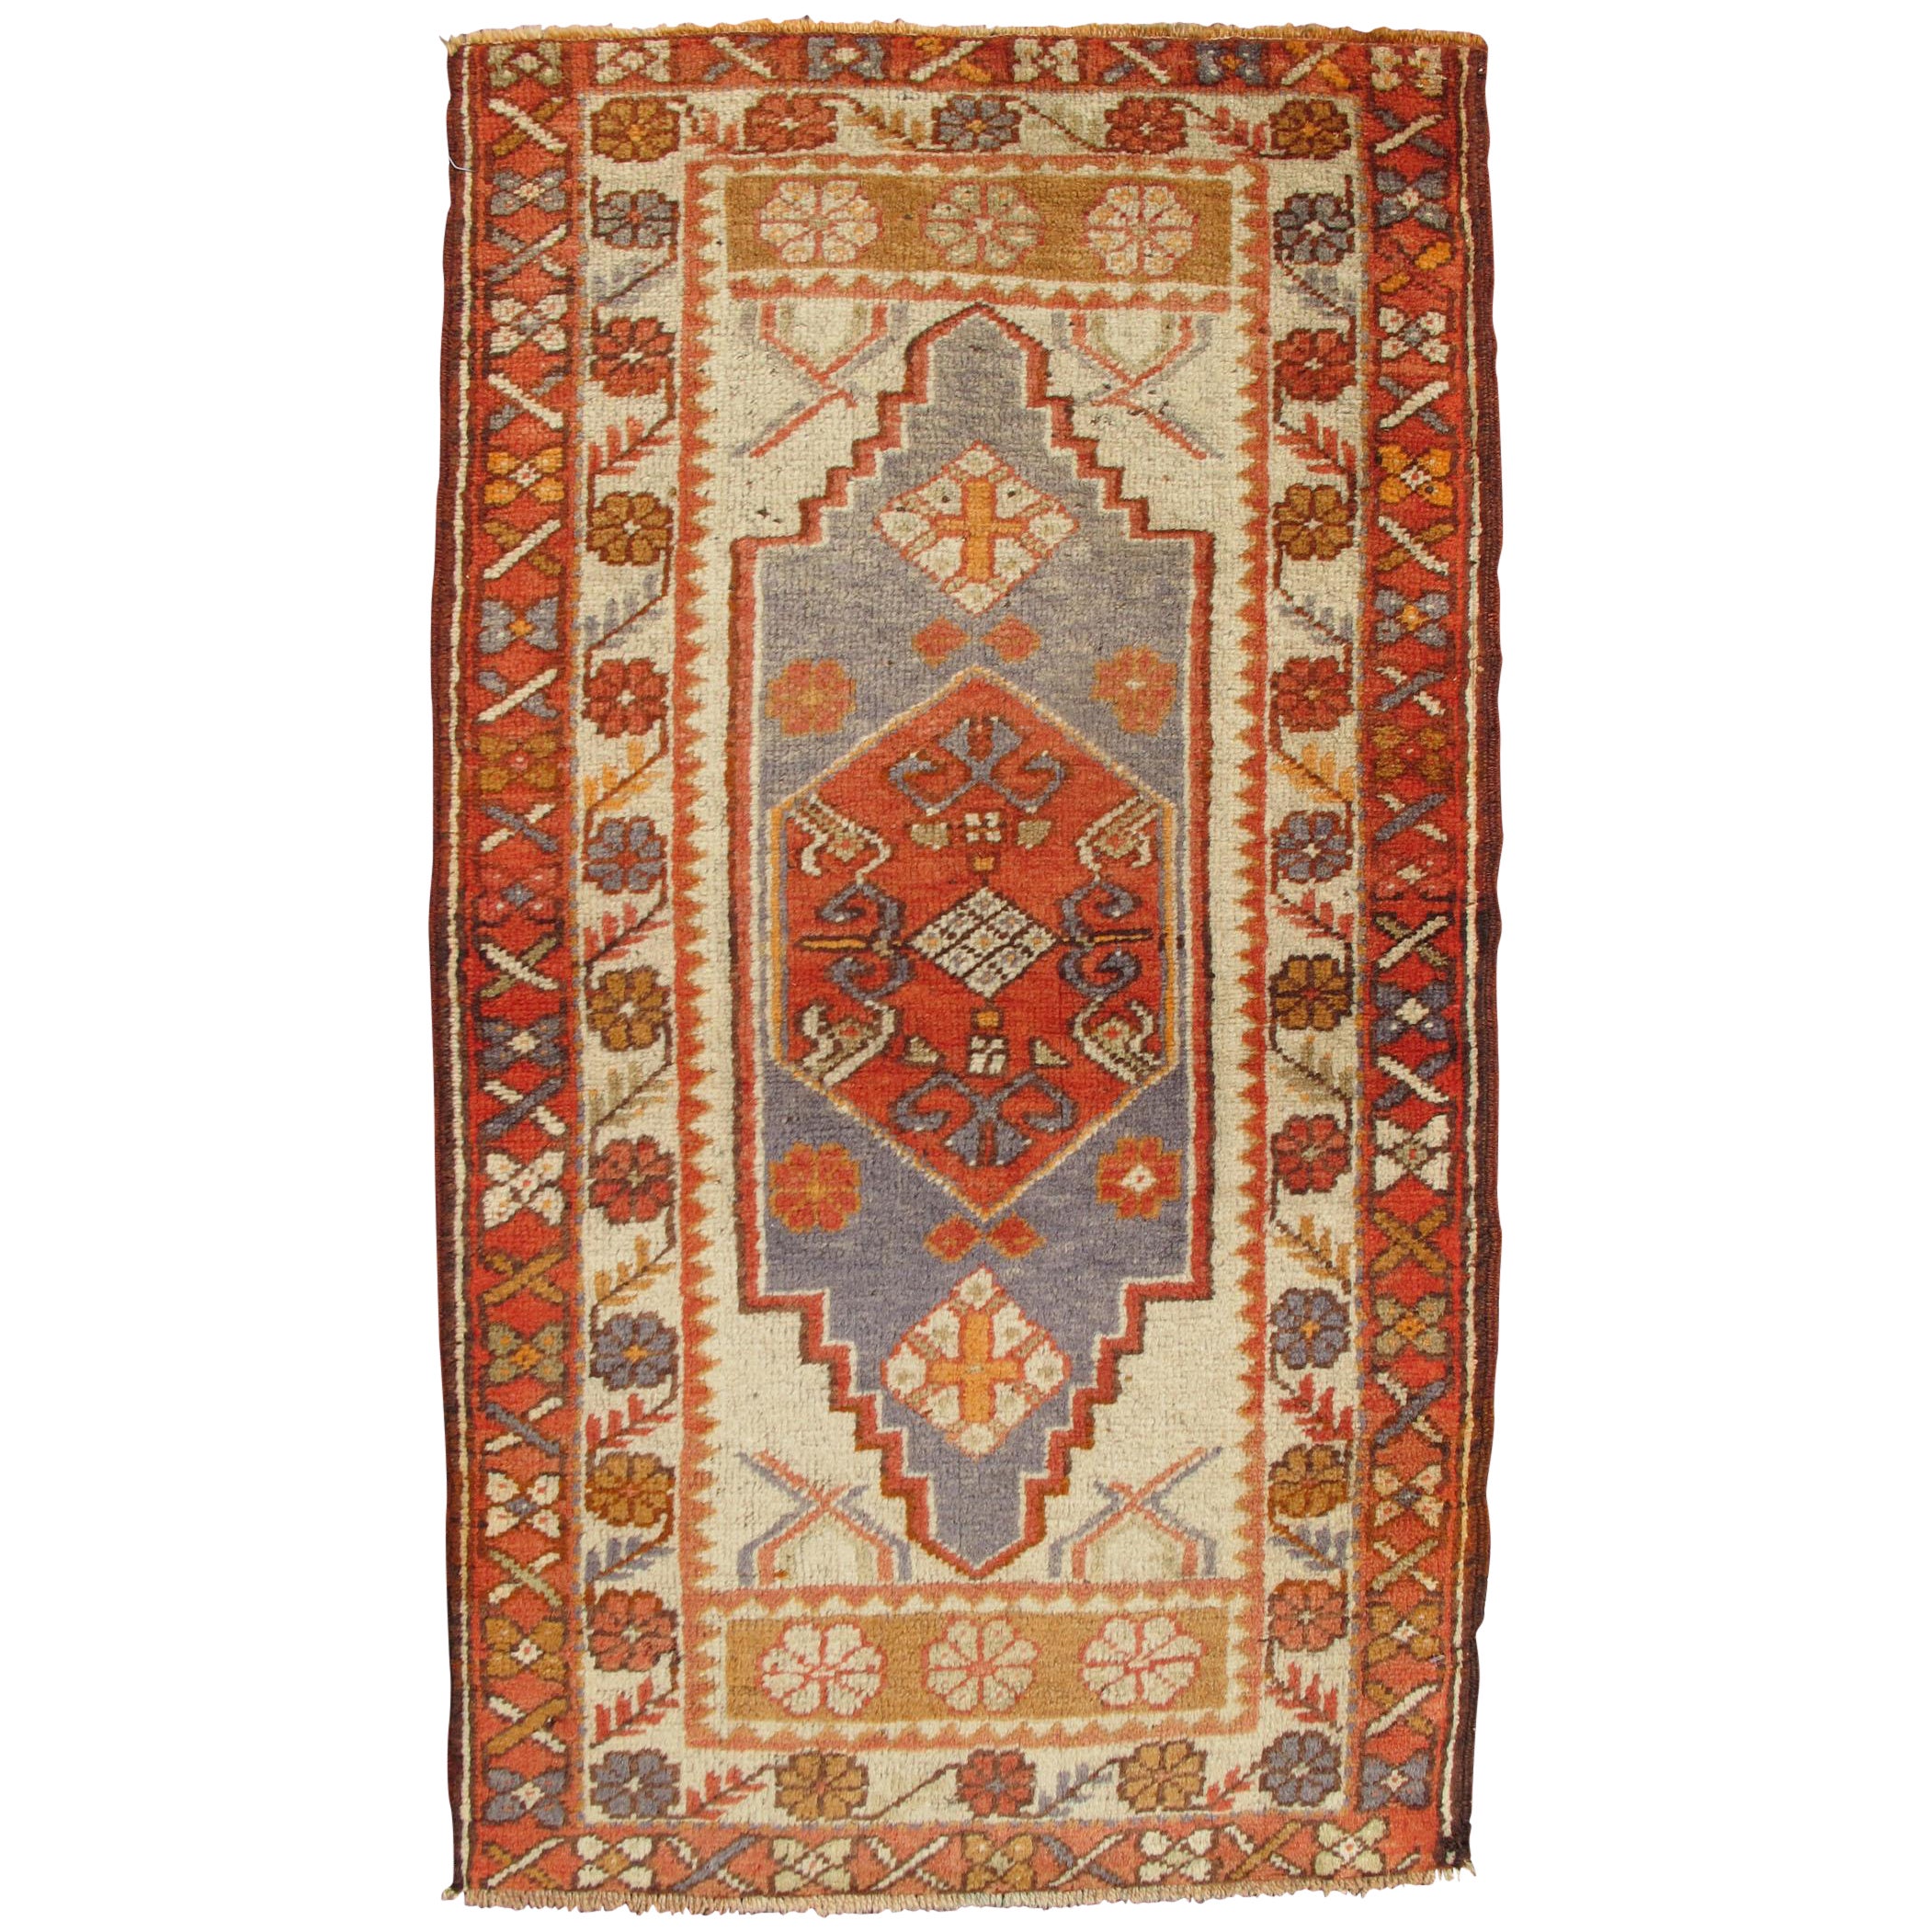 Antique Oushak Turkish Rug from Turkey in Burnt Red, Orange and Muted Grey Blue